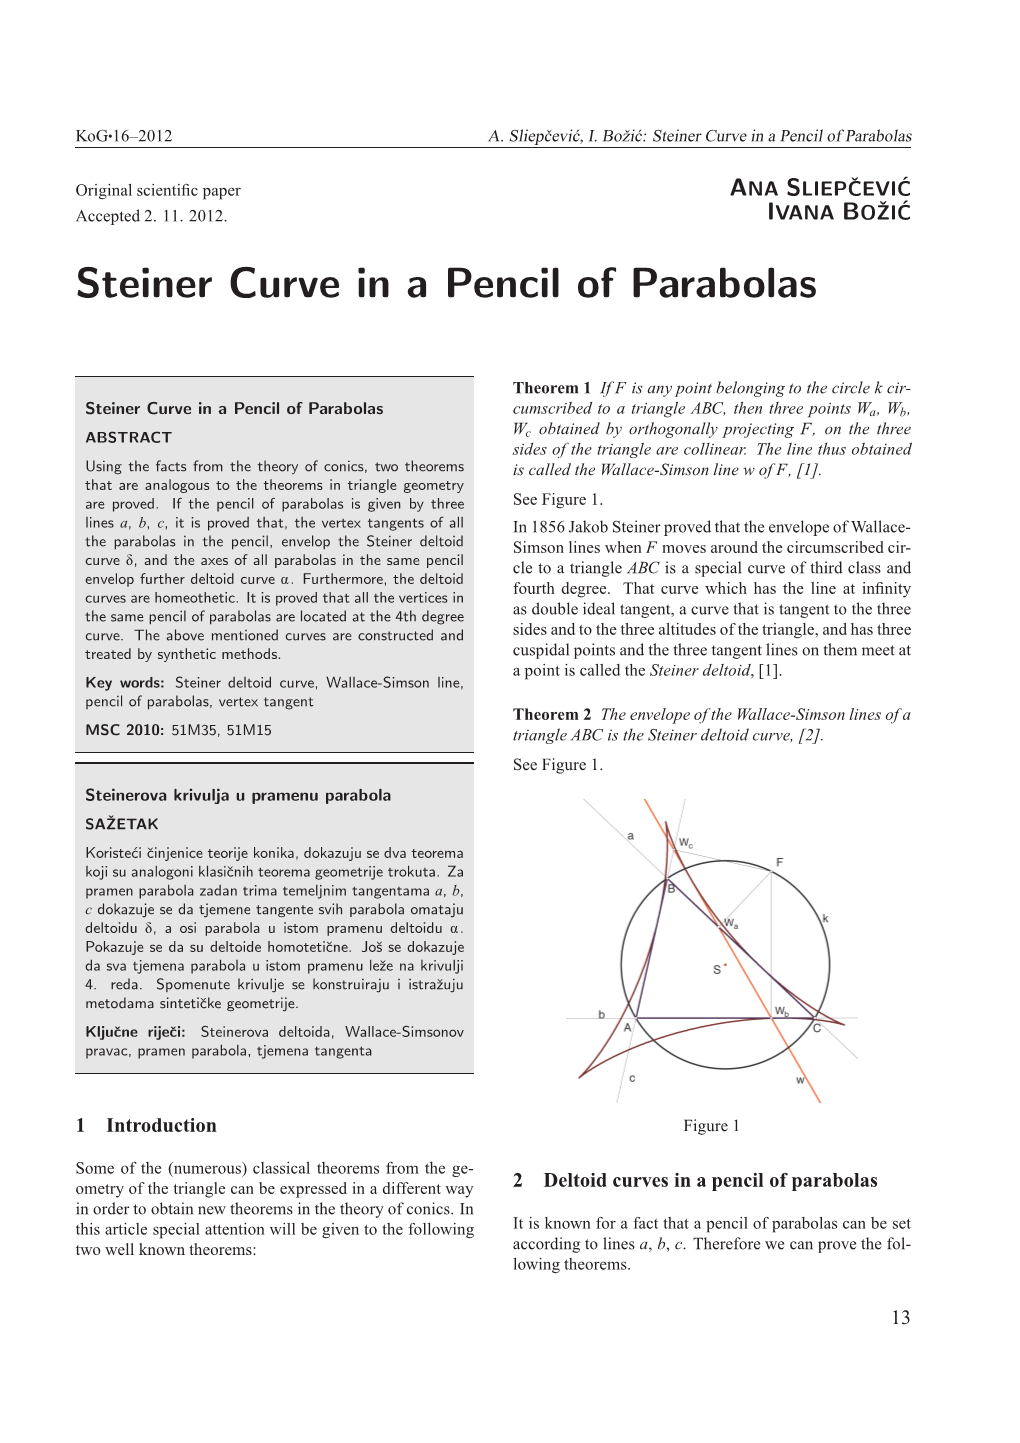 Steiner Curve in a Pencil of Parabolas